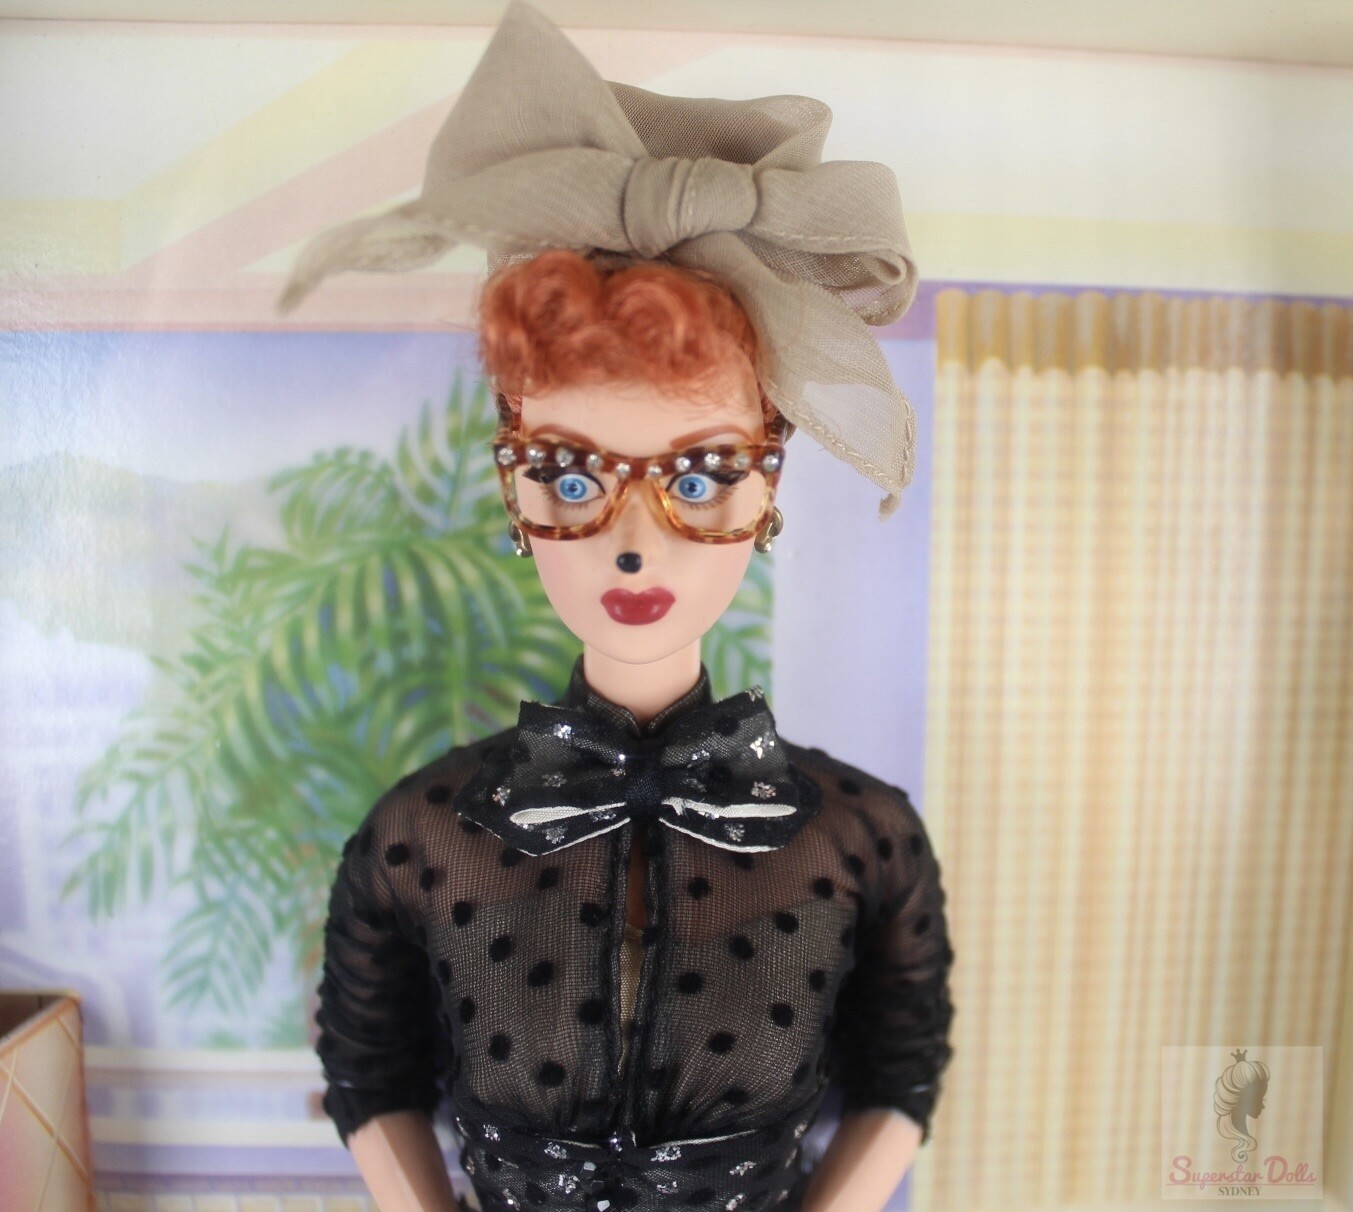 2002 Collector Edition: I Love Lucy Episode 114 Lucille Ball Barbie Doll